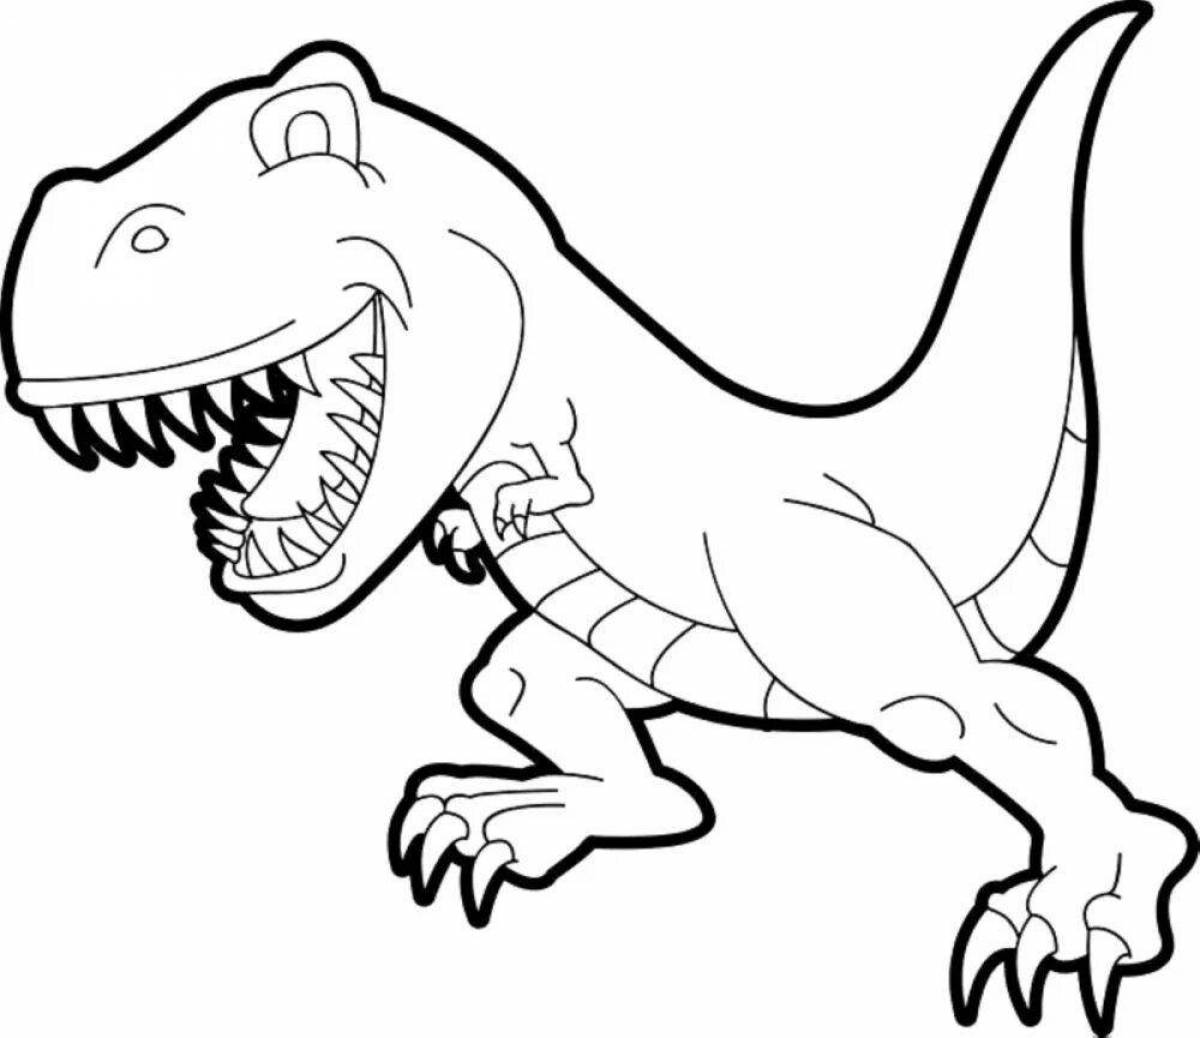 Colorful tirex coloring page